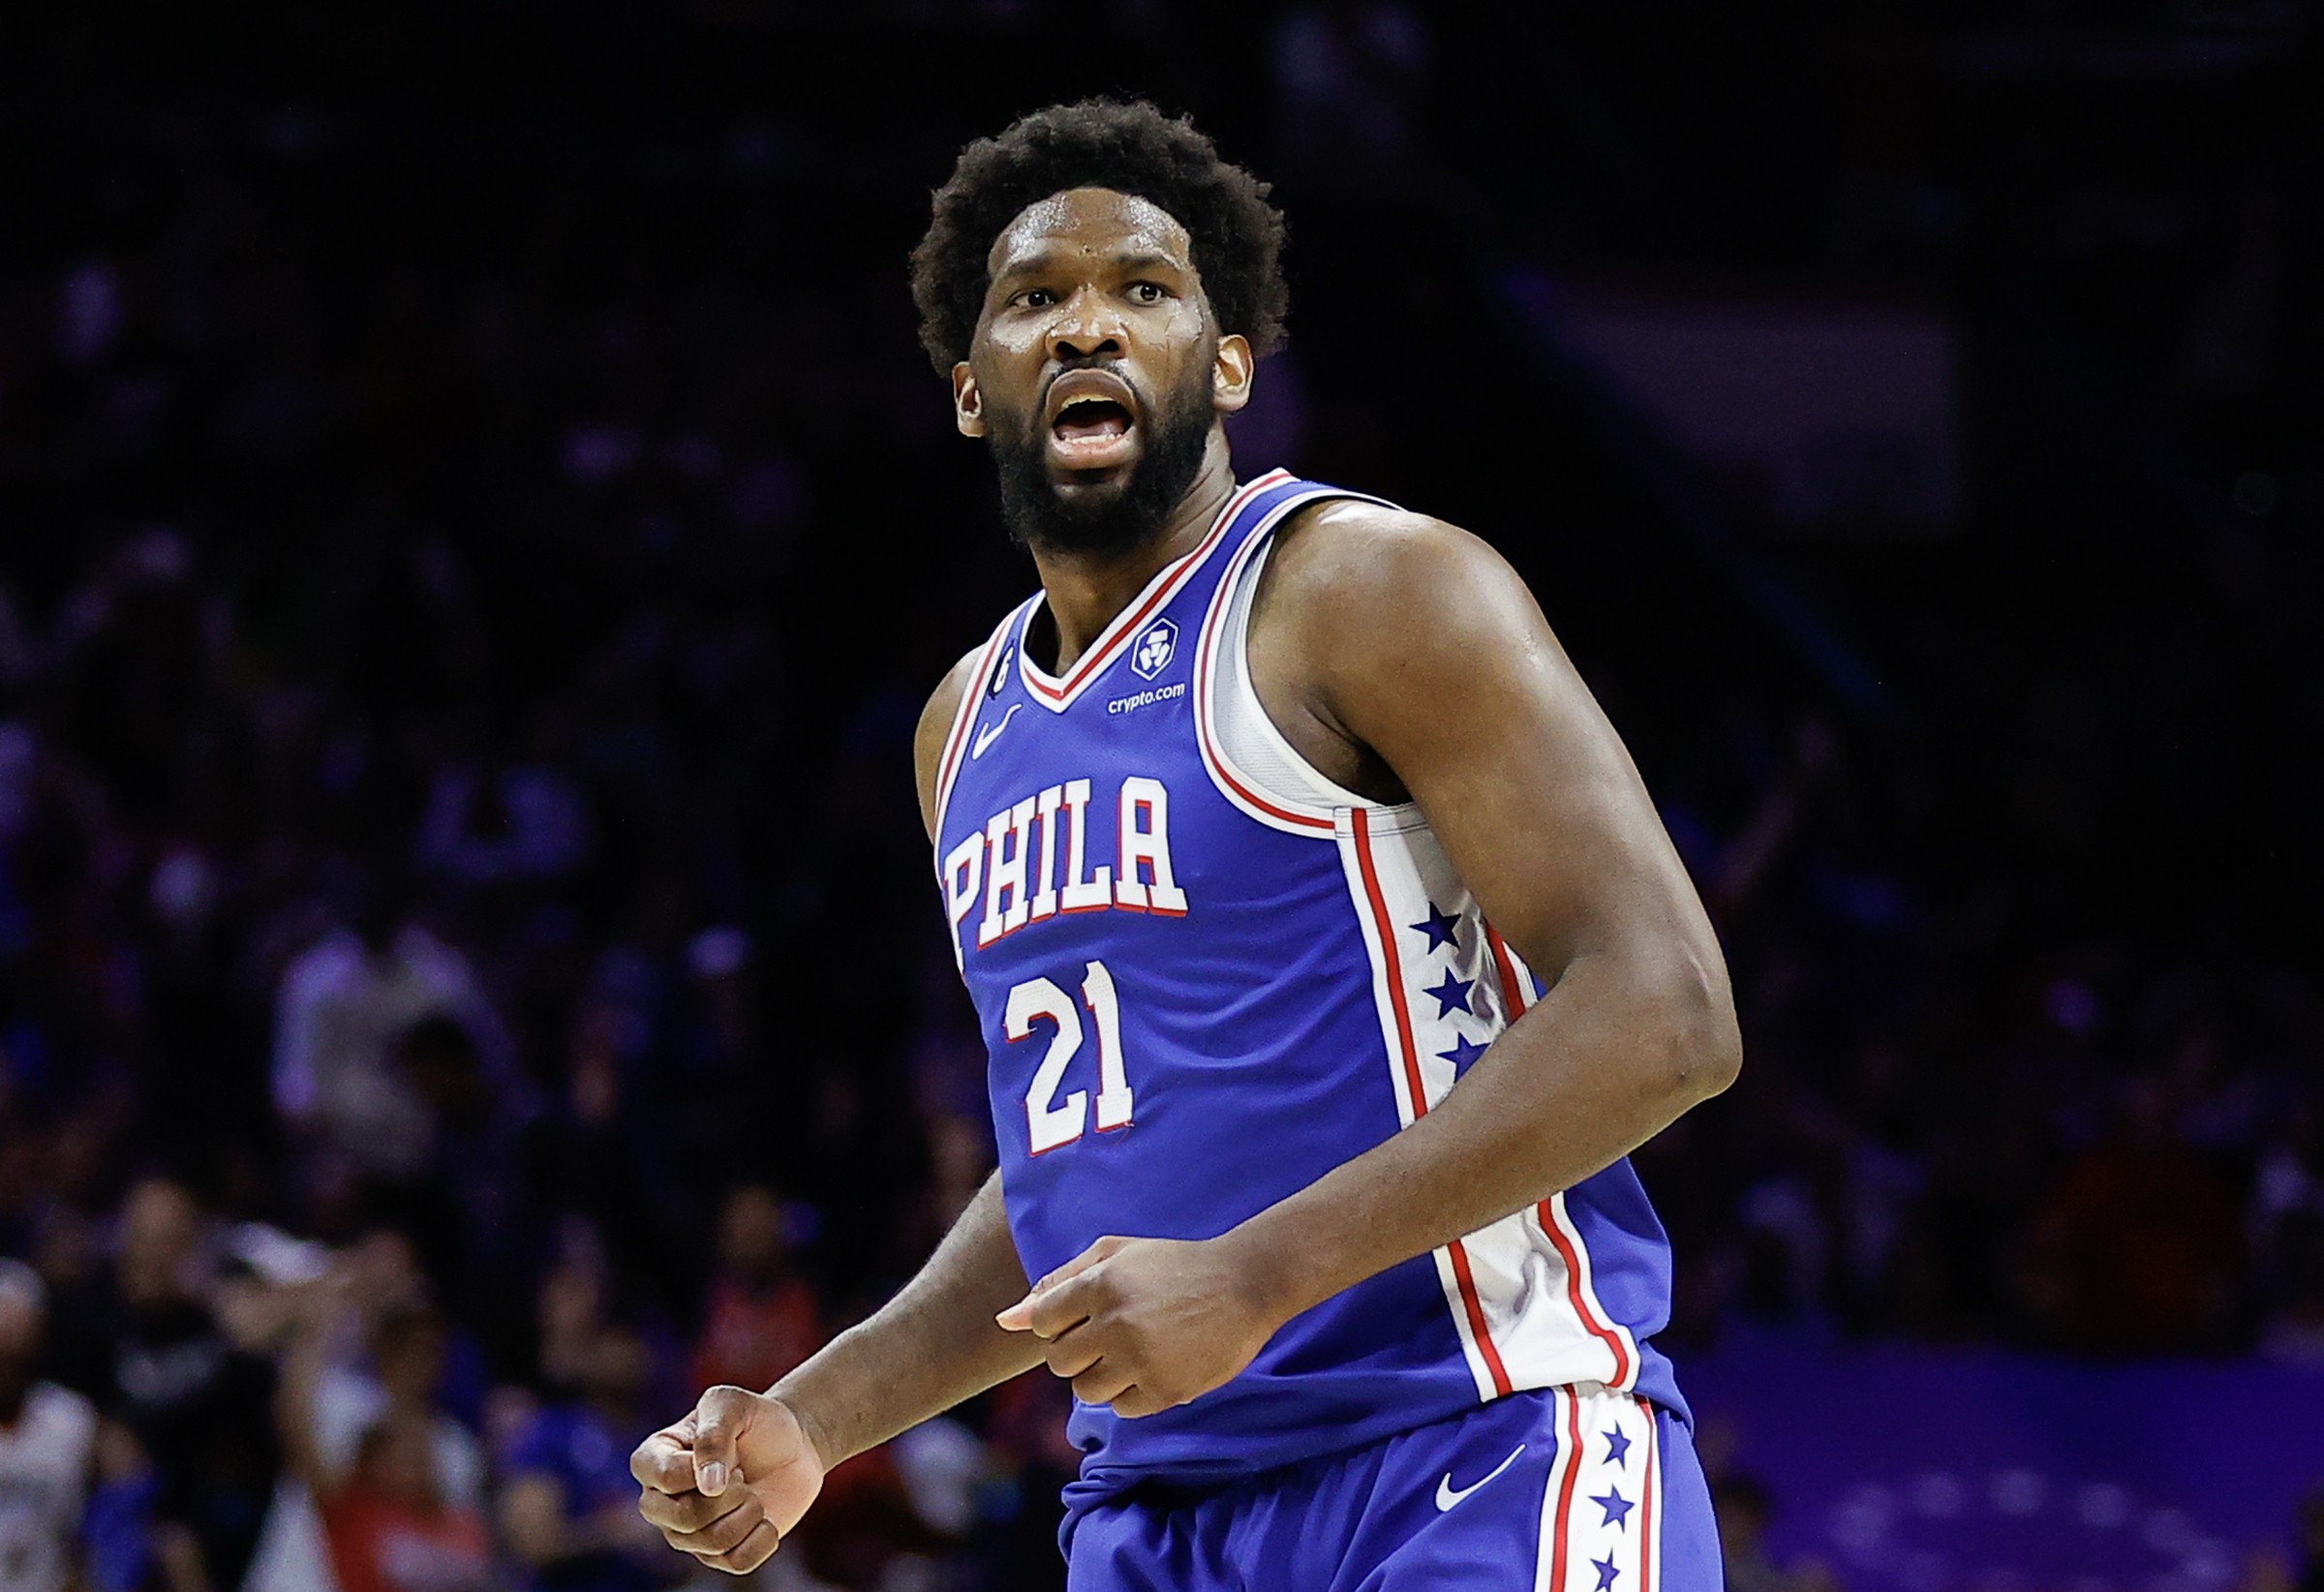 Sixers hold Joel Embiid out of practice